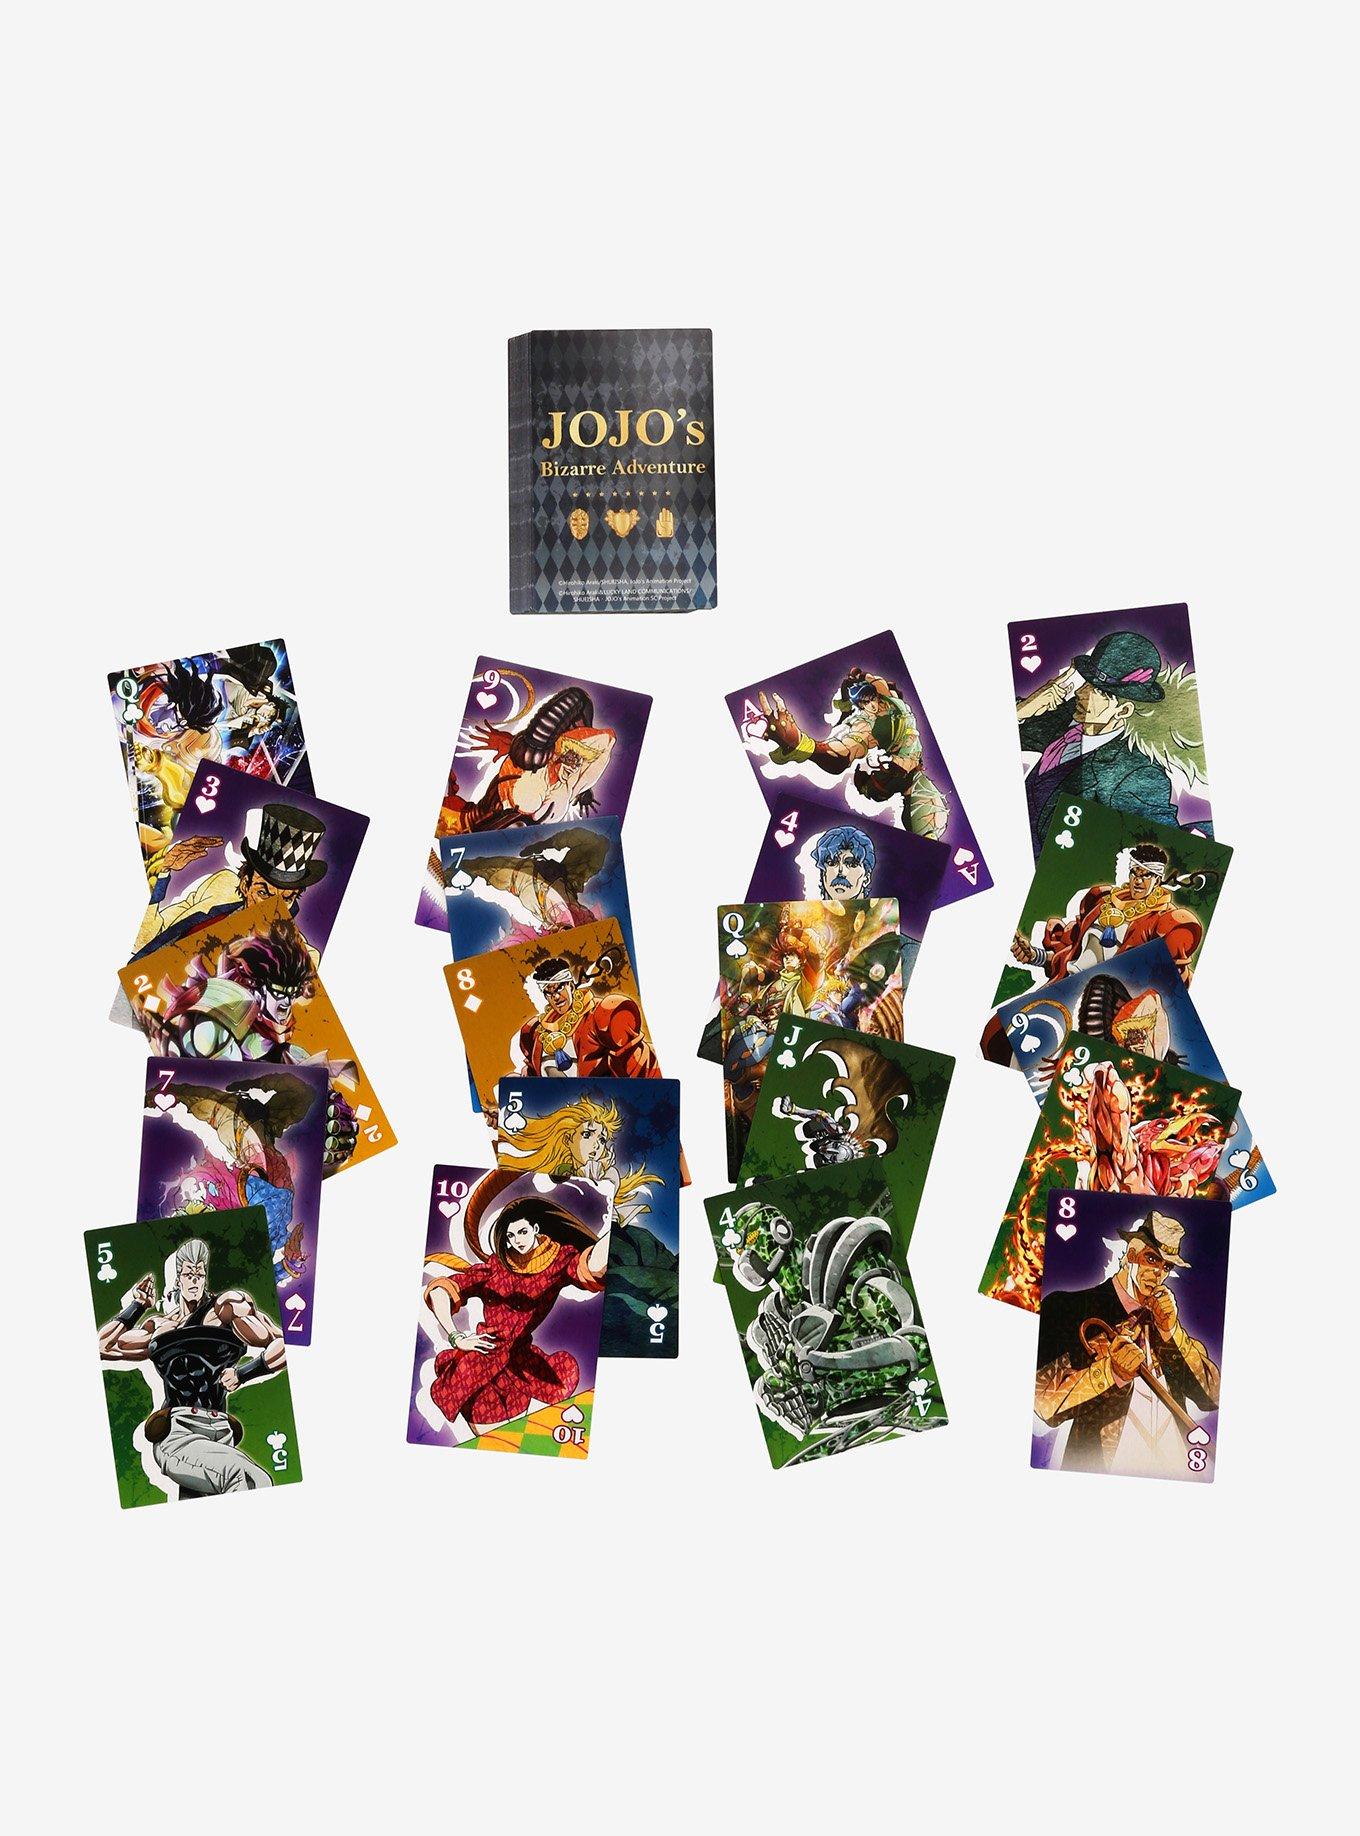  JoJo Bizarre Adventures Cards - JJBA Anime Cards Booster Packs  - TCG CCG Collectable Trading Card Game Box (10 Packs) - AW Anime WRLD :  Toys & Games